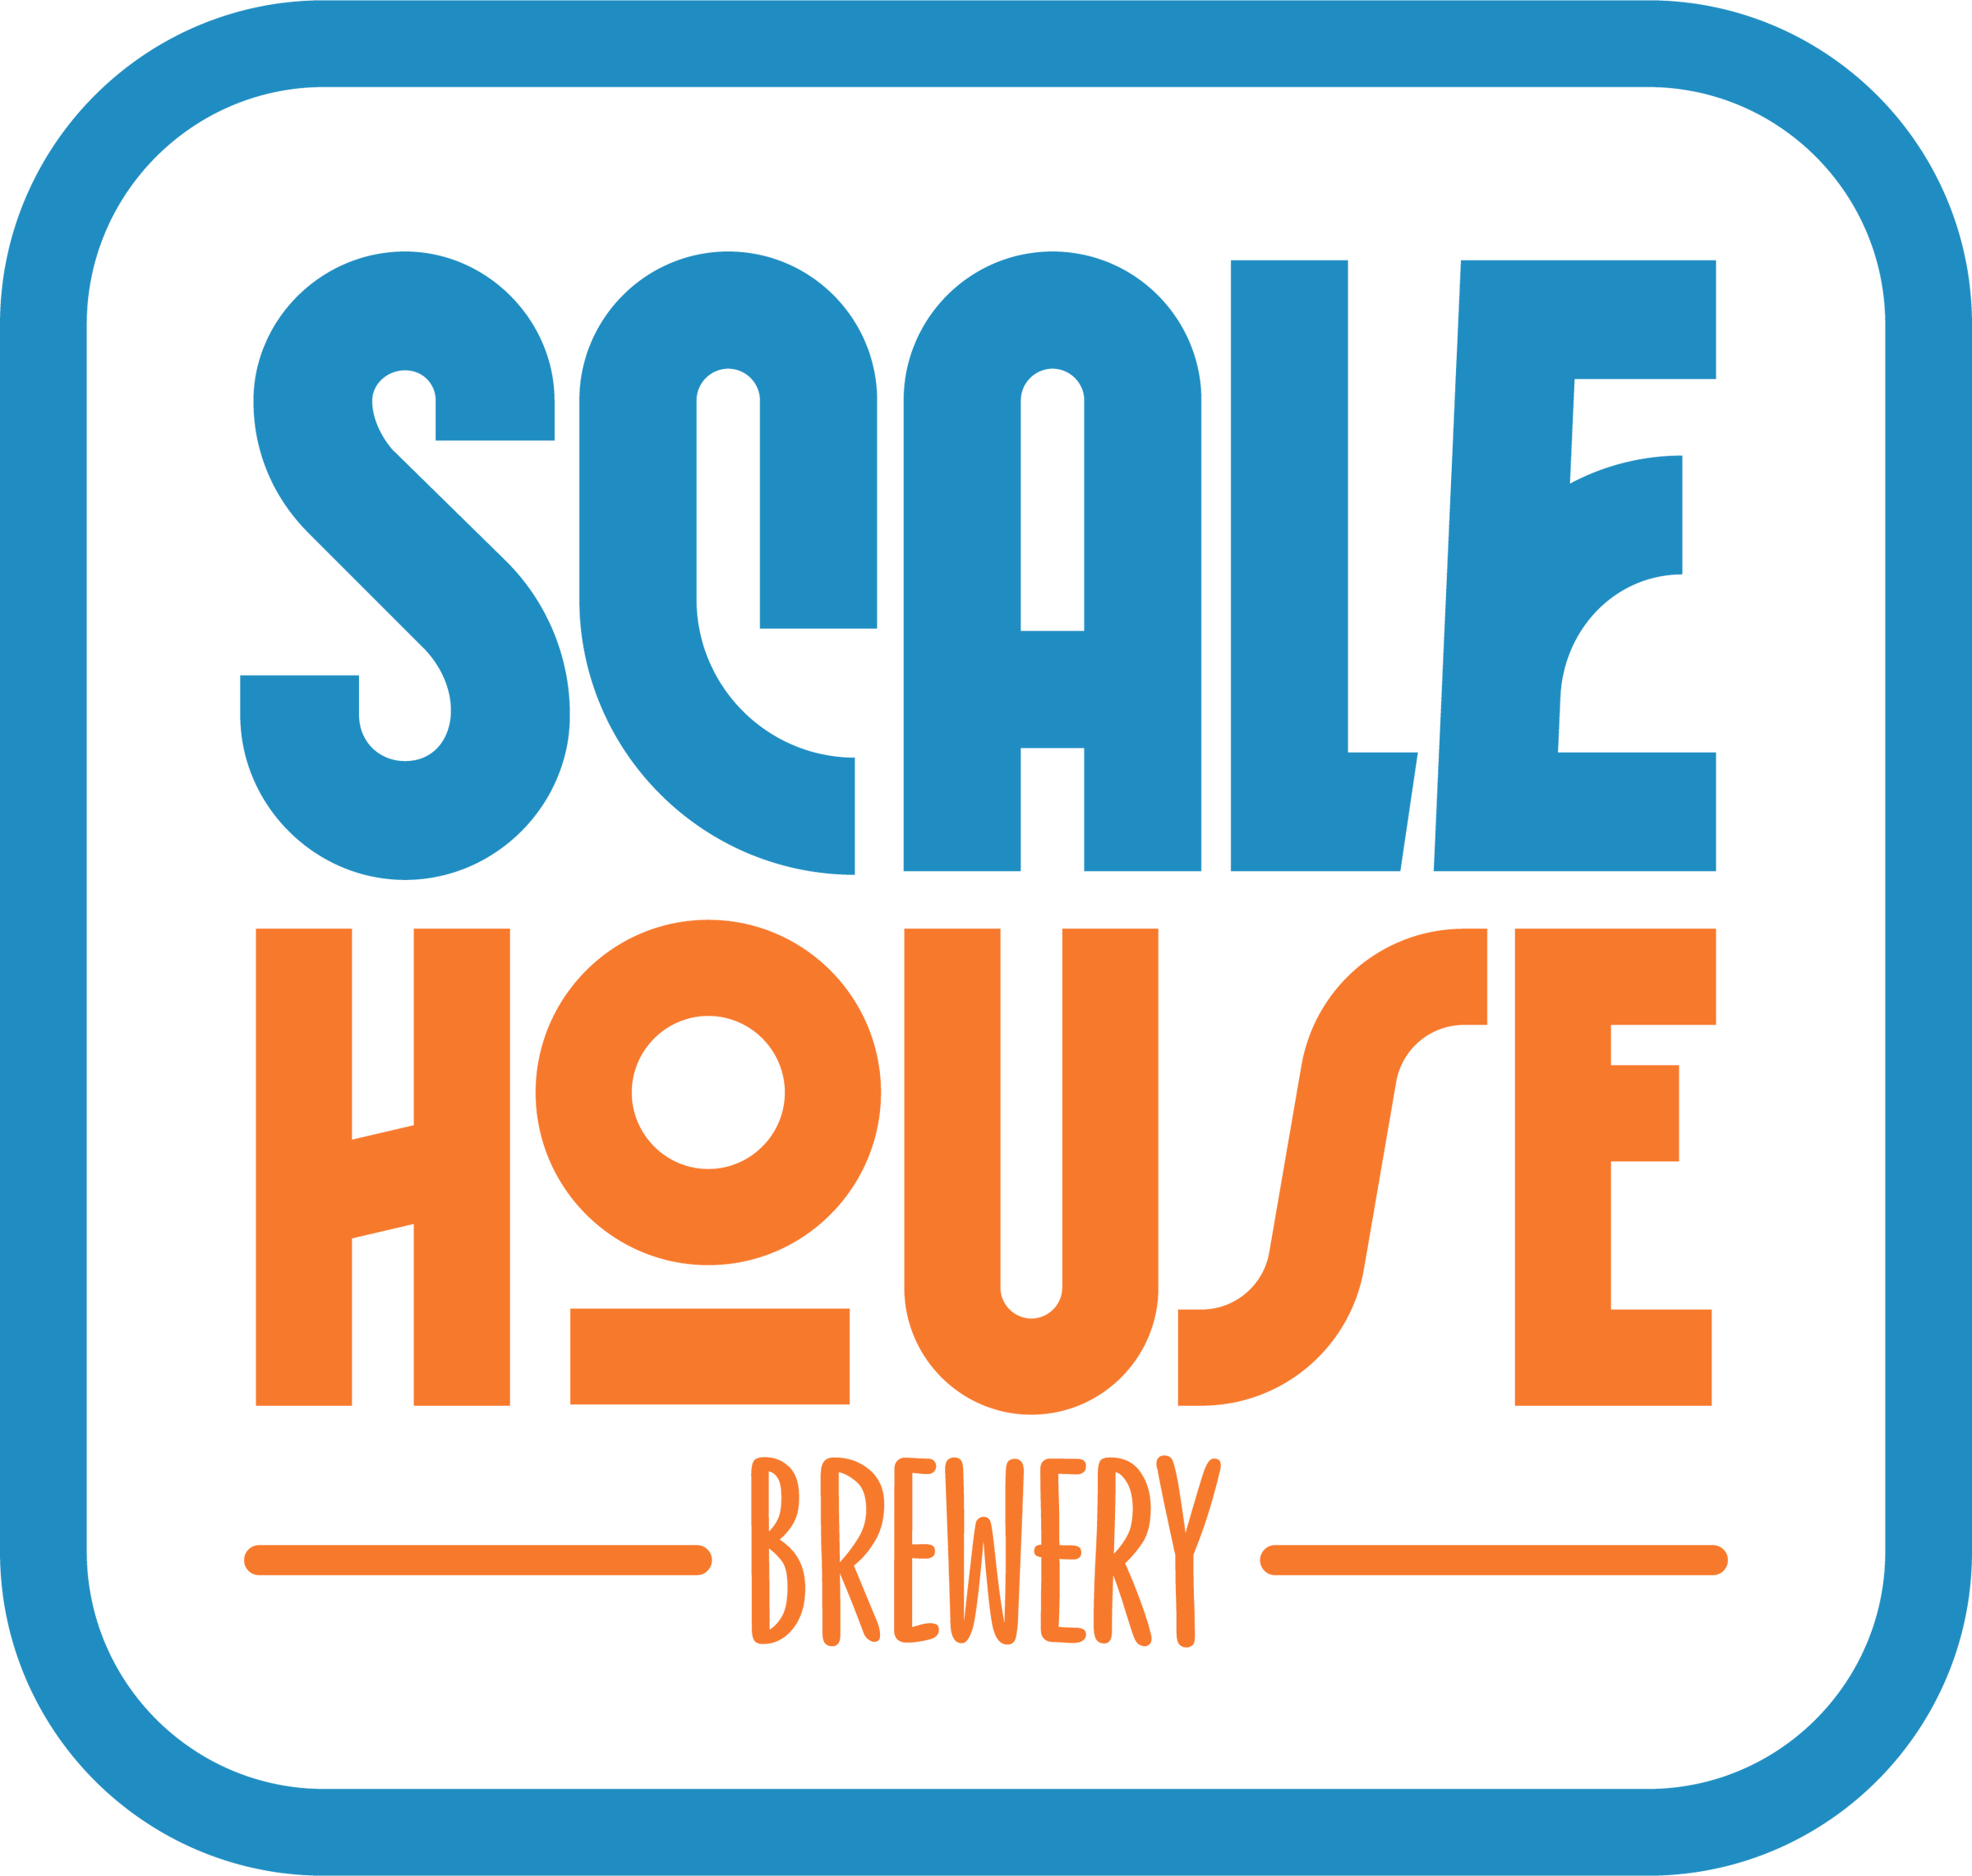 Home  Scale House Brewery - Hector, NY